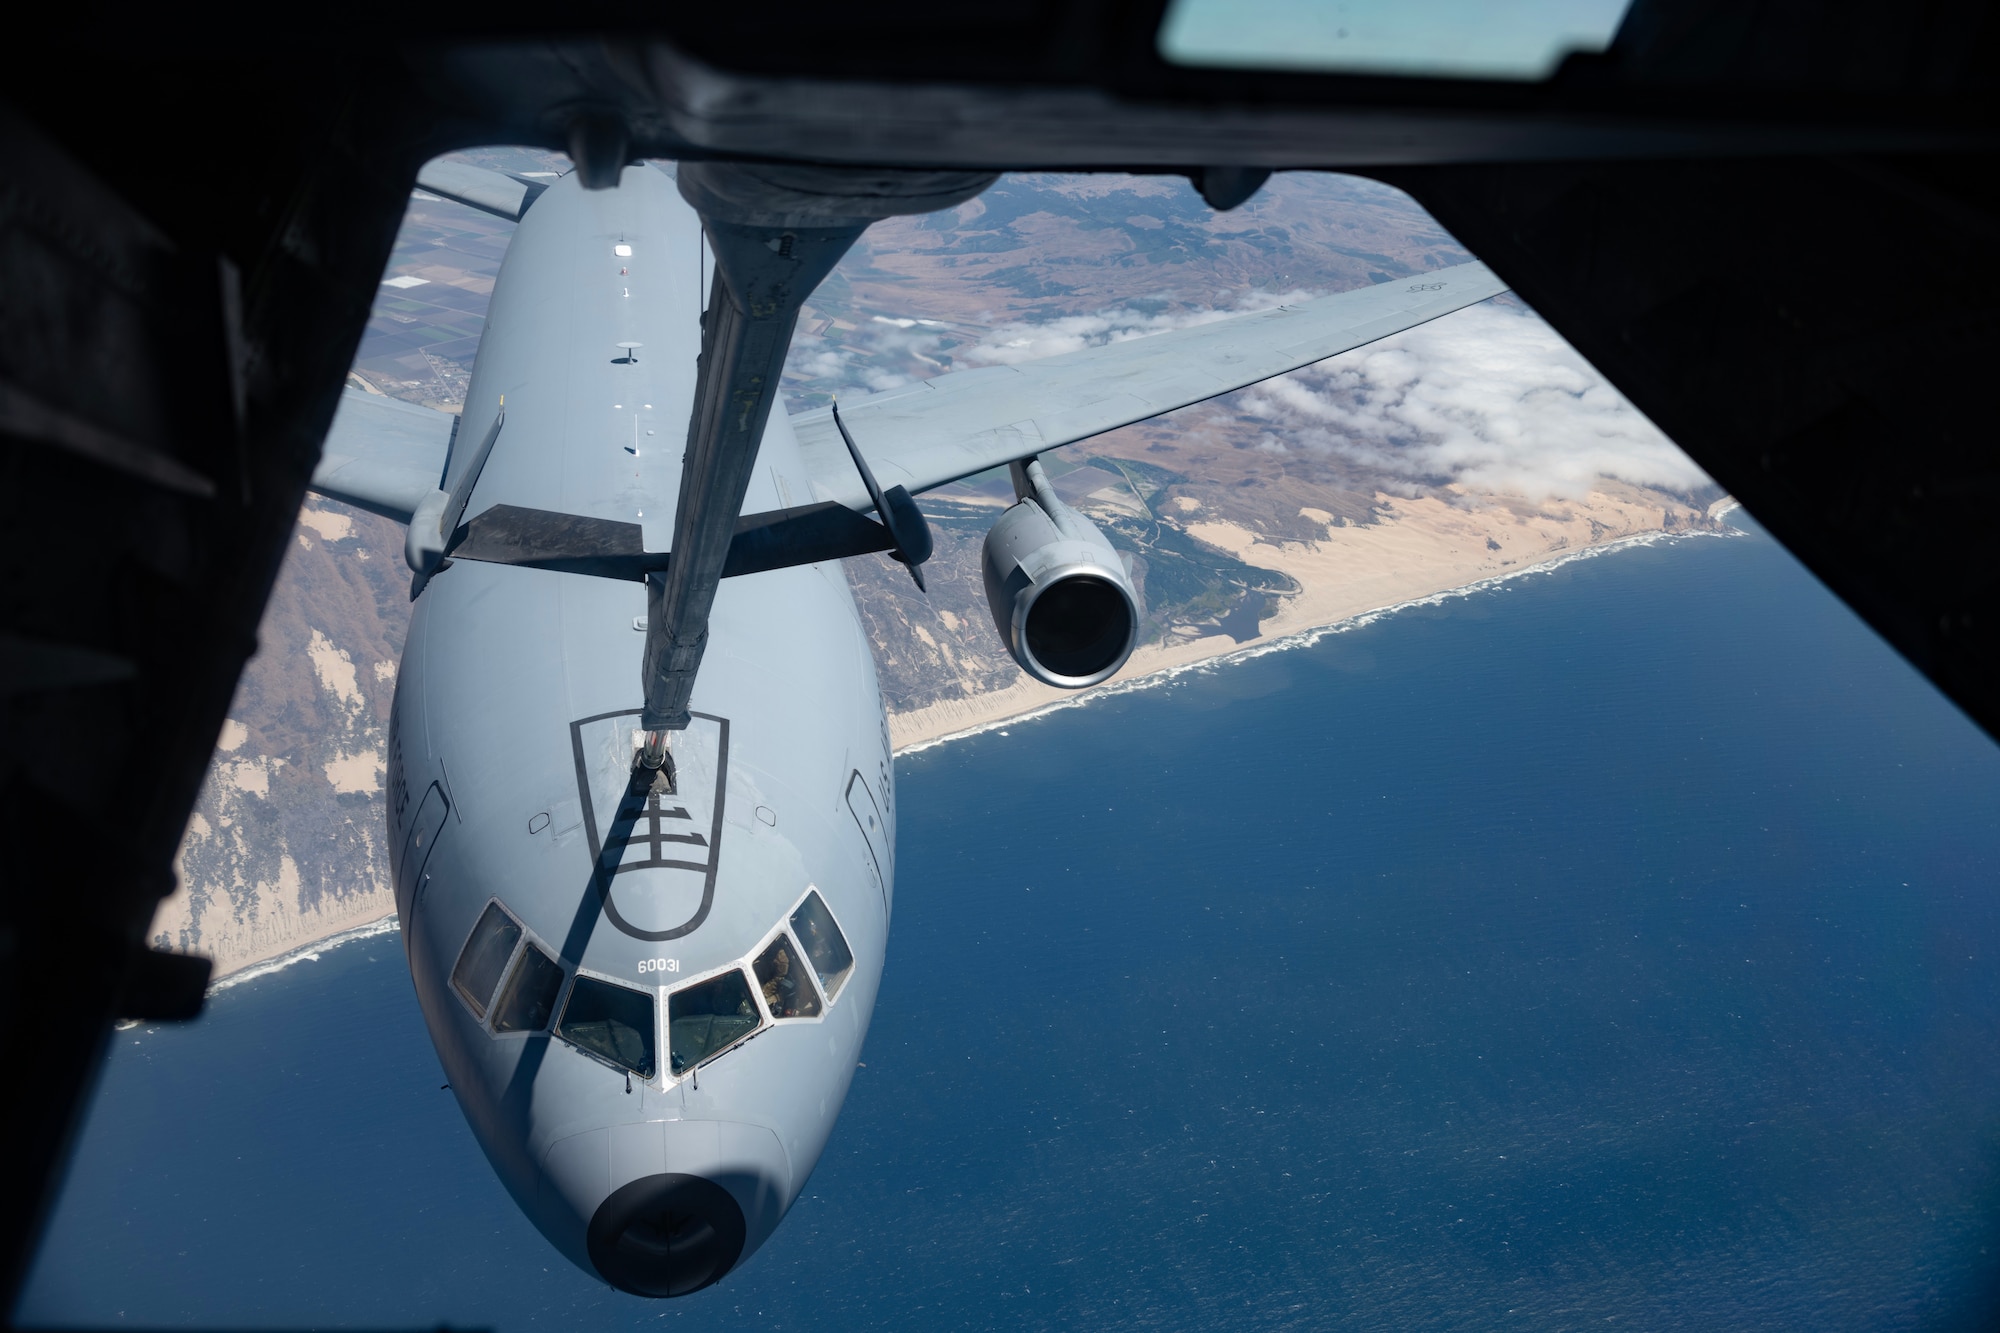 aircraft getting air refueling